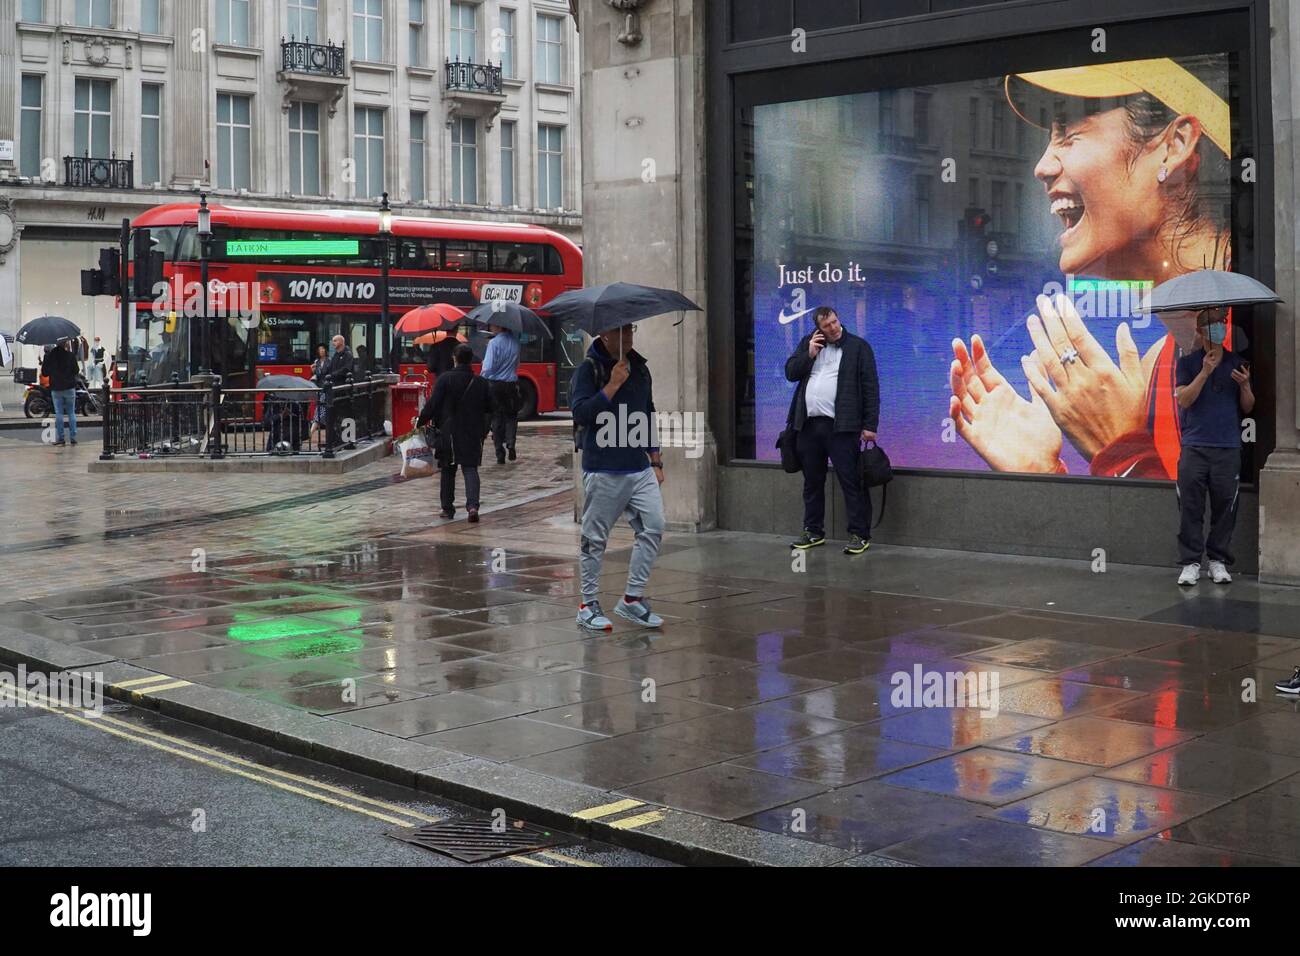 London, UK, 14 September 2021: At Nike Town at Oxford Circus in the heart  of the West End giant screens show images of tennis prodigy Emma Raducanu,  taken a moment after she